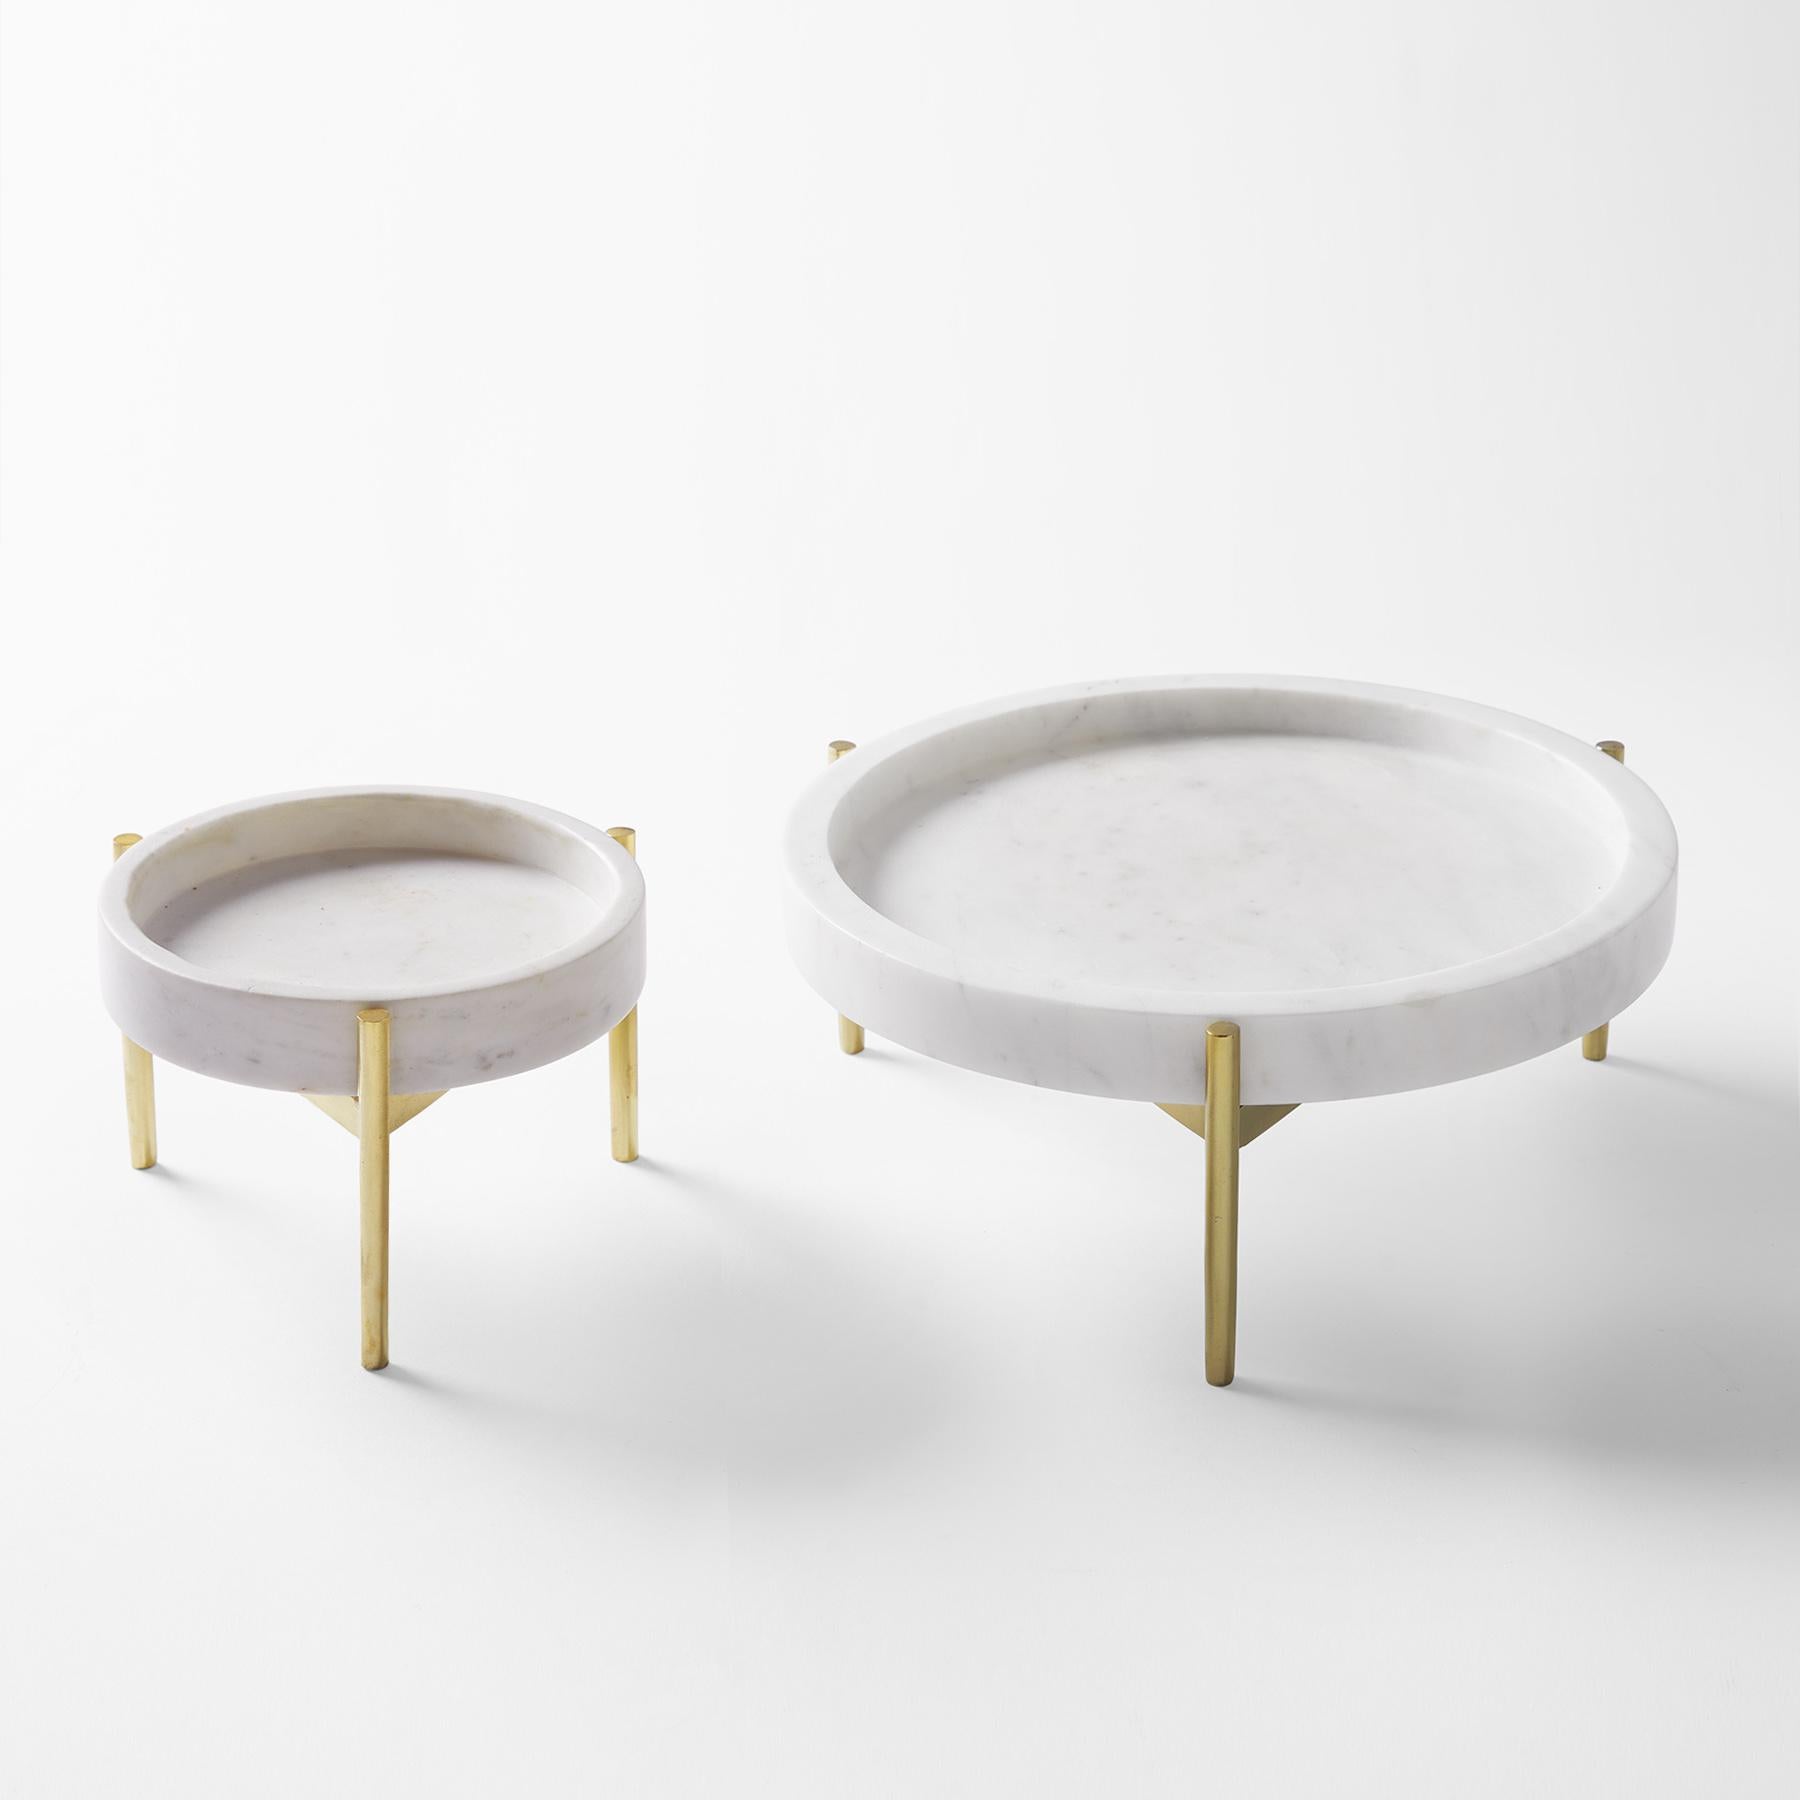 Marble & Gold Geo Cake Stand Small